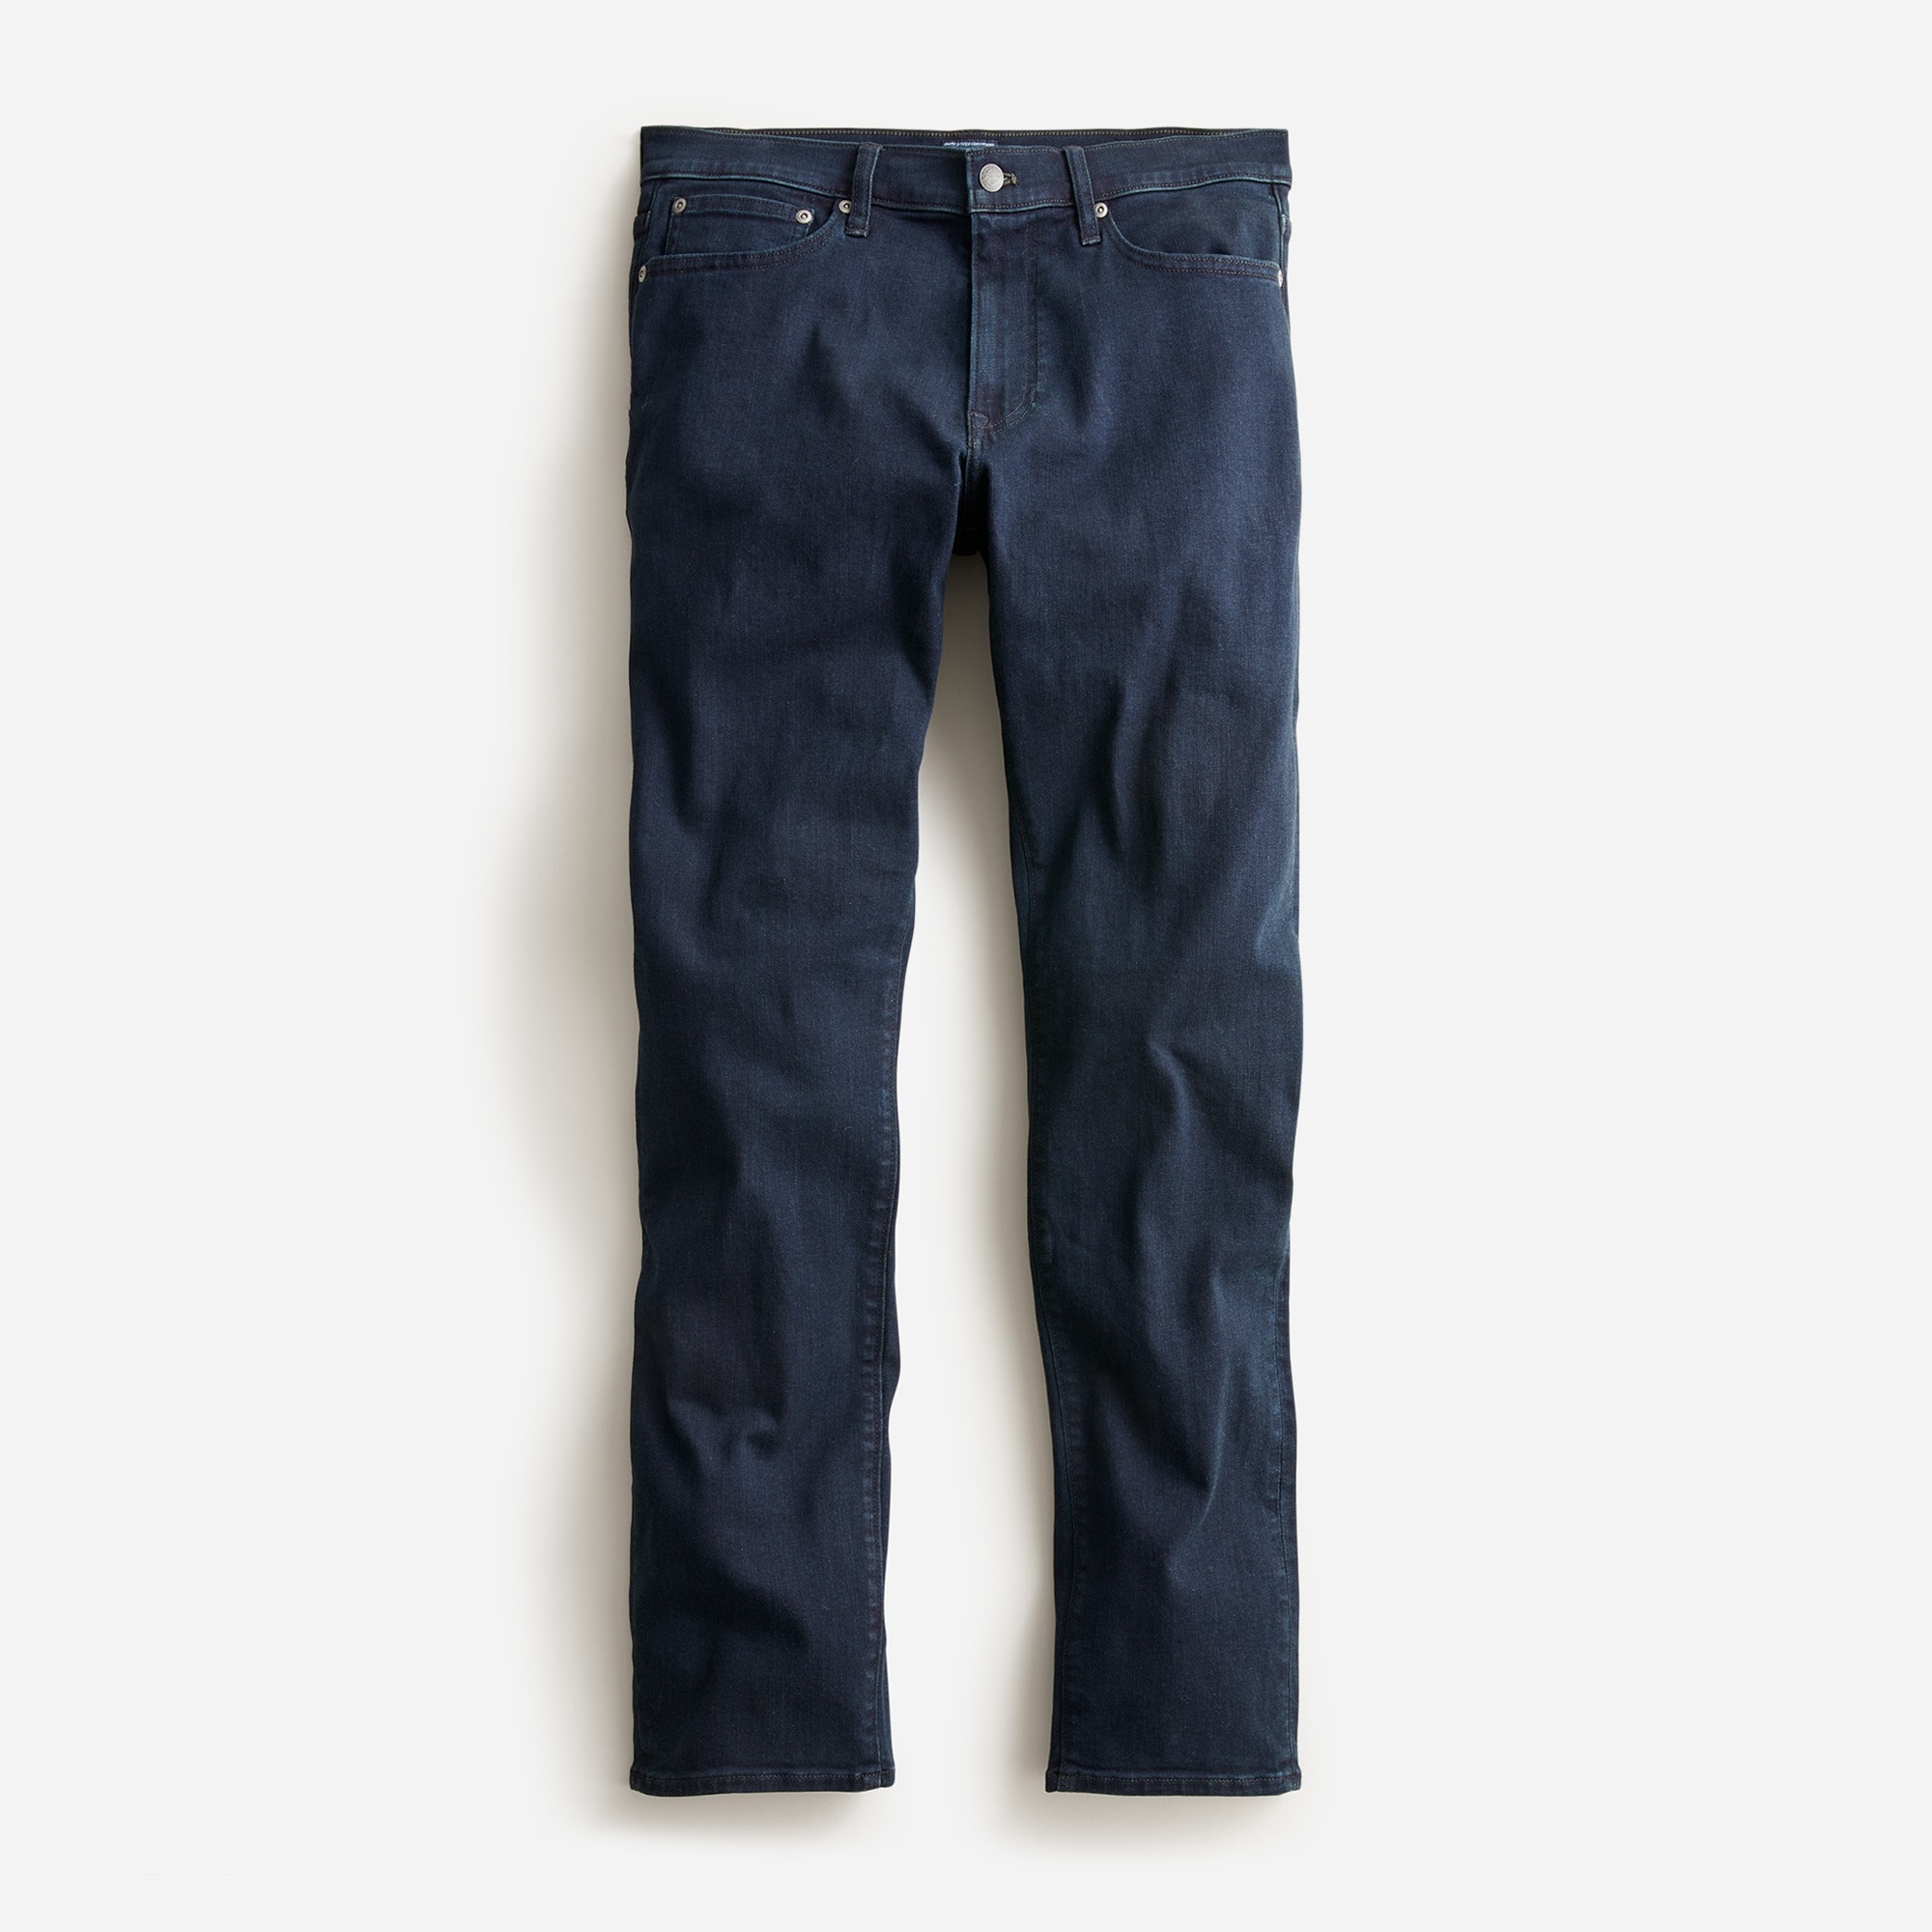 mens 1040 Athletic tapered-fit stretch jean in deep lake wash